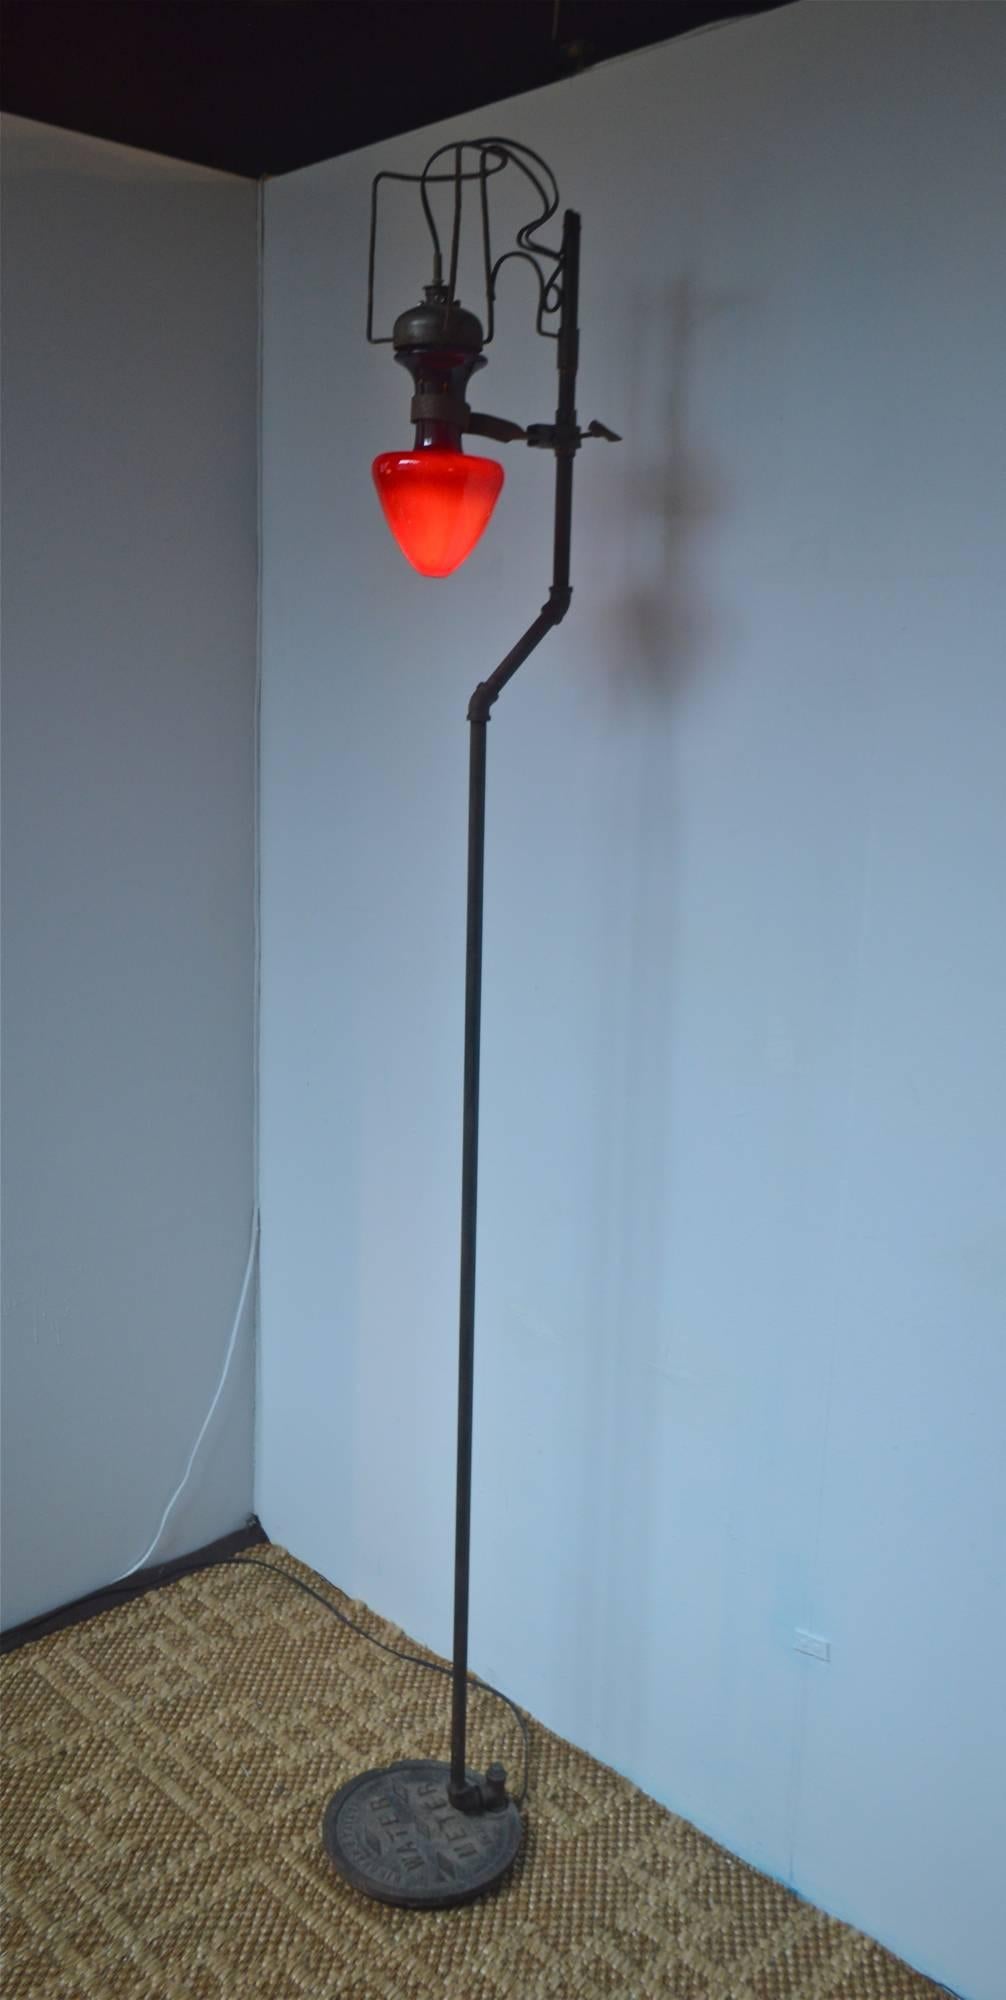 A very unique floor lamp having Industrial and Steampunk style. The tall light was created with youthful passion by ceramic artist / musician Eli Simon around 2001-2002. Composed of found metal elements the spartan and futuristic lamp is juxtaposed